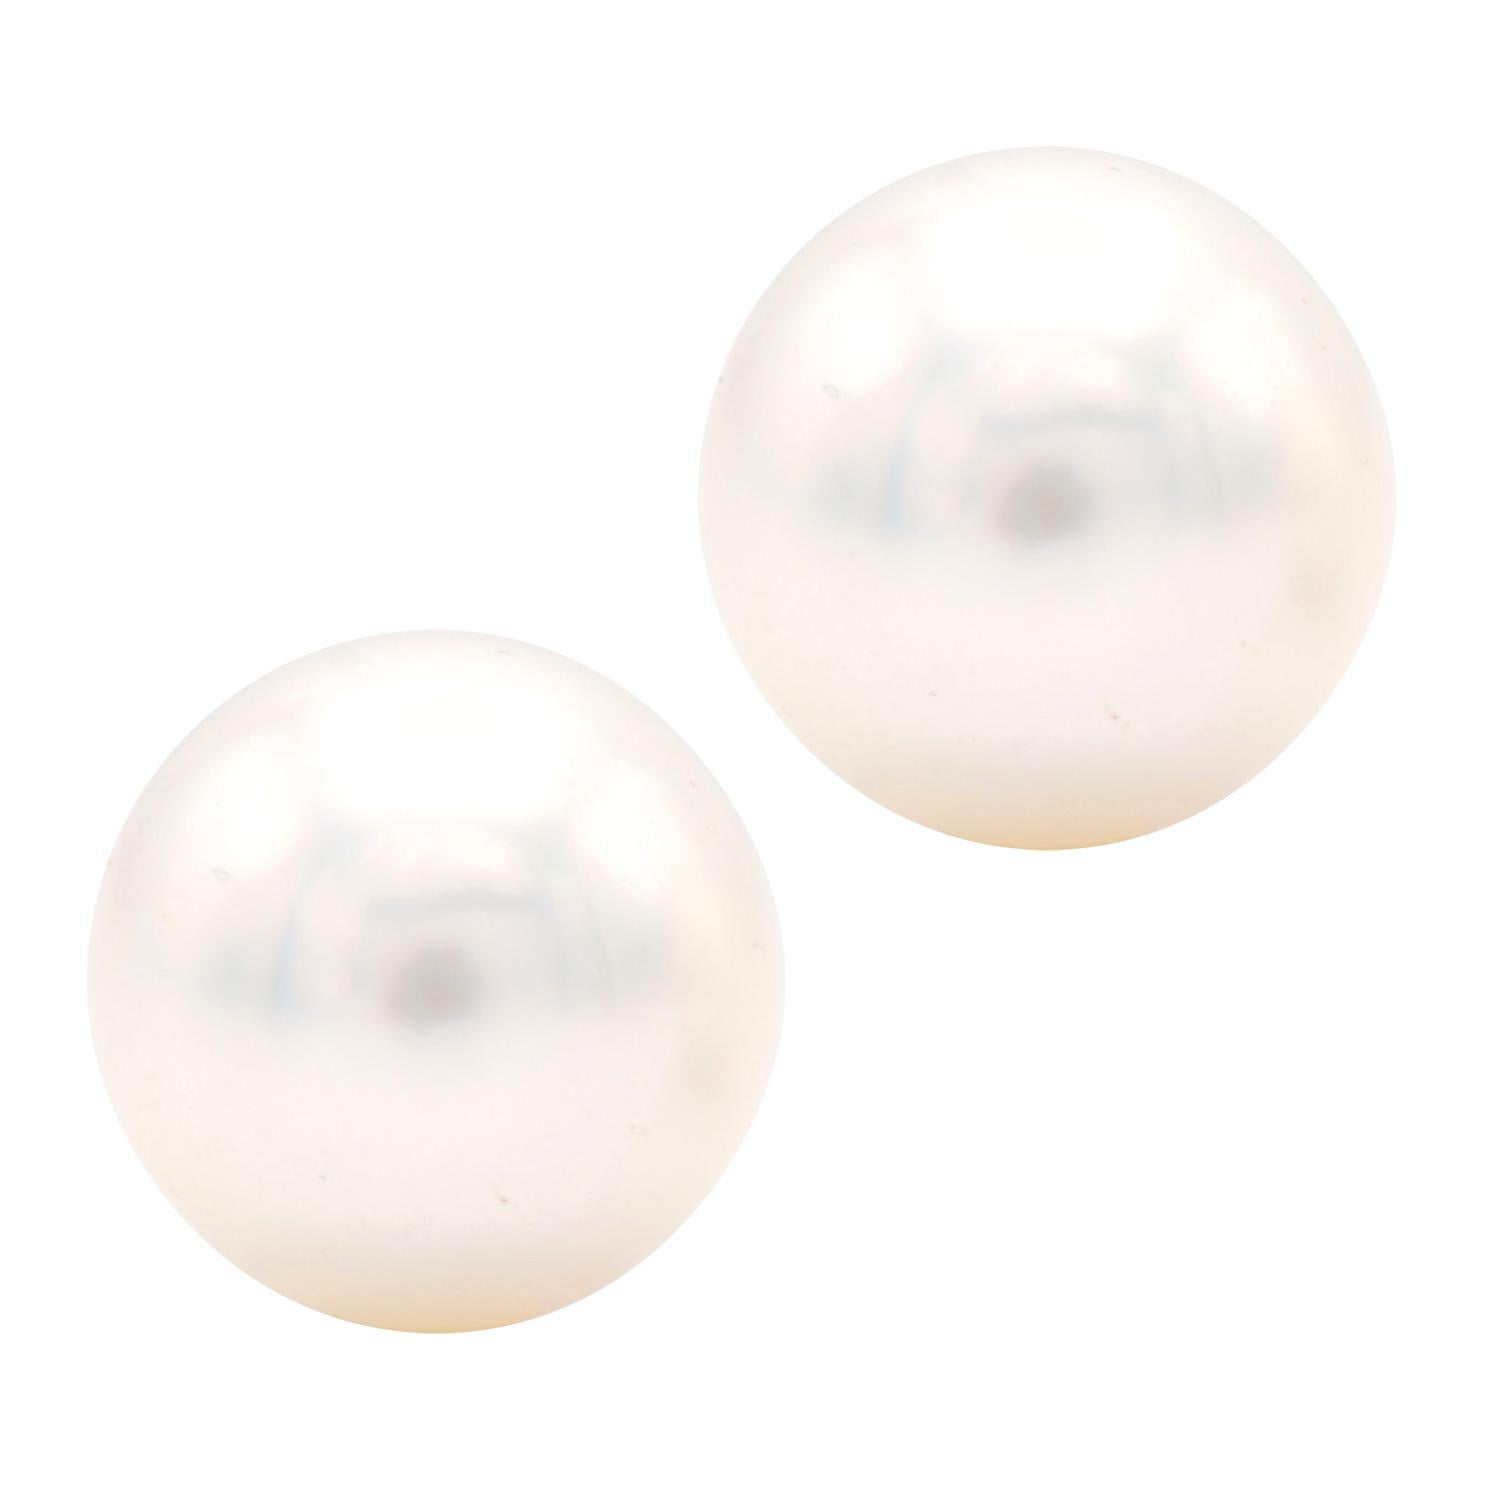 Cultured pearl stud earrings are the most classic and timeless piece of jewelry. They can be worn by anyone and everyone and make an excellent gift for all occasions. These 6.5-7mm cultured pearl earrings are perfectly matched and set in 14 karat